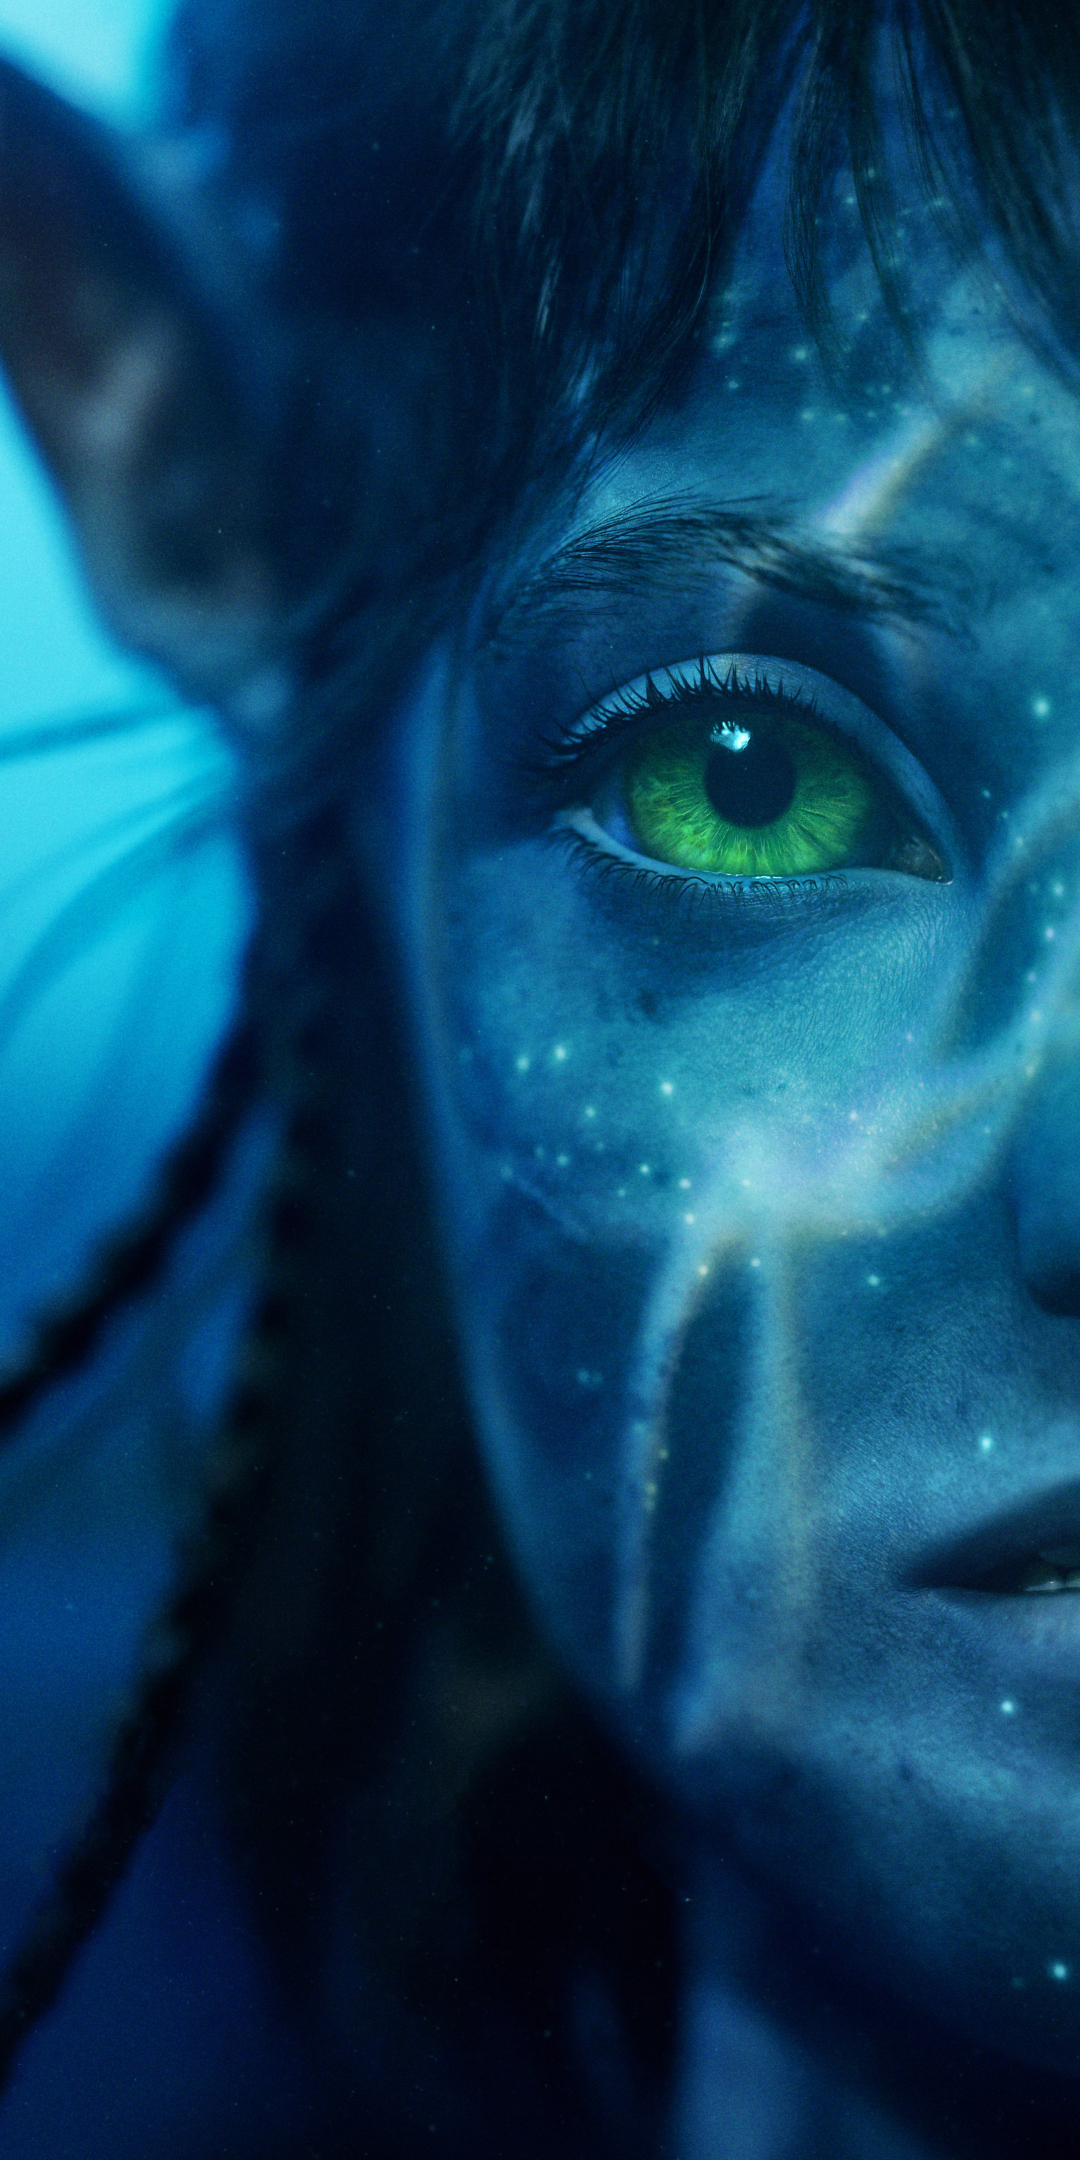 Avatar: The Way of Water, 2022 movie, sci-fi, 1080x2160 wallpaper